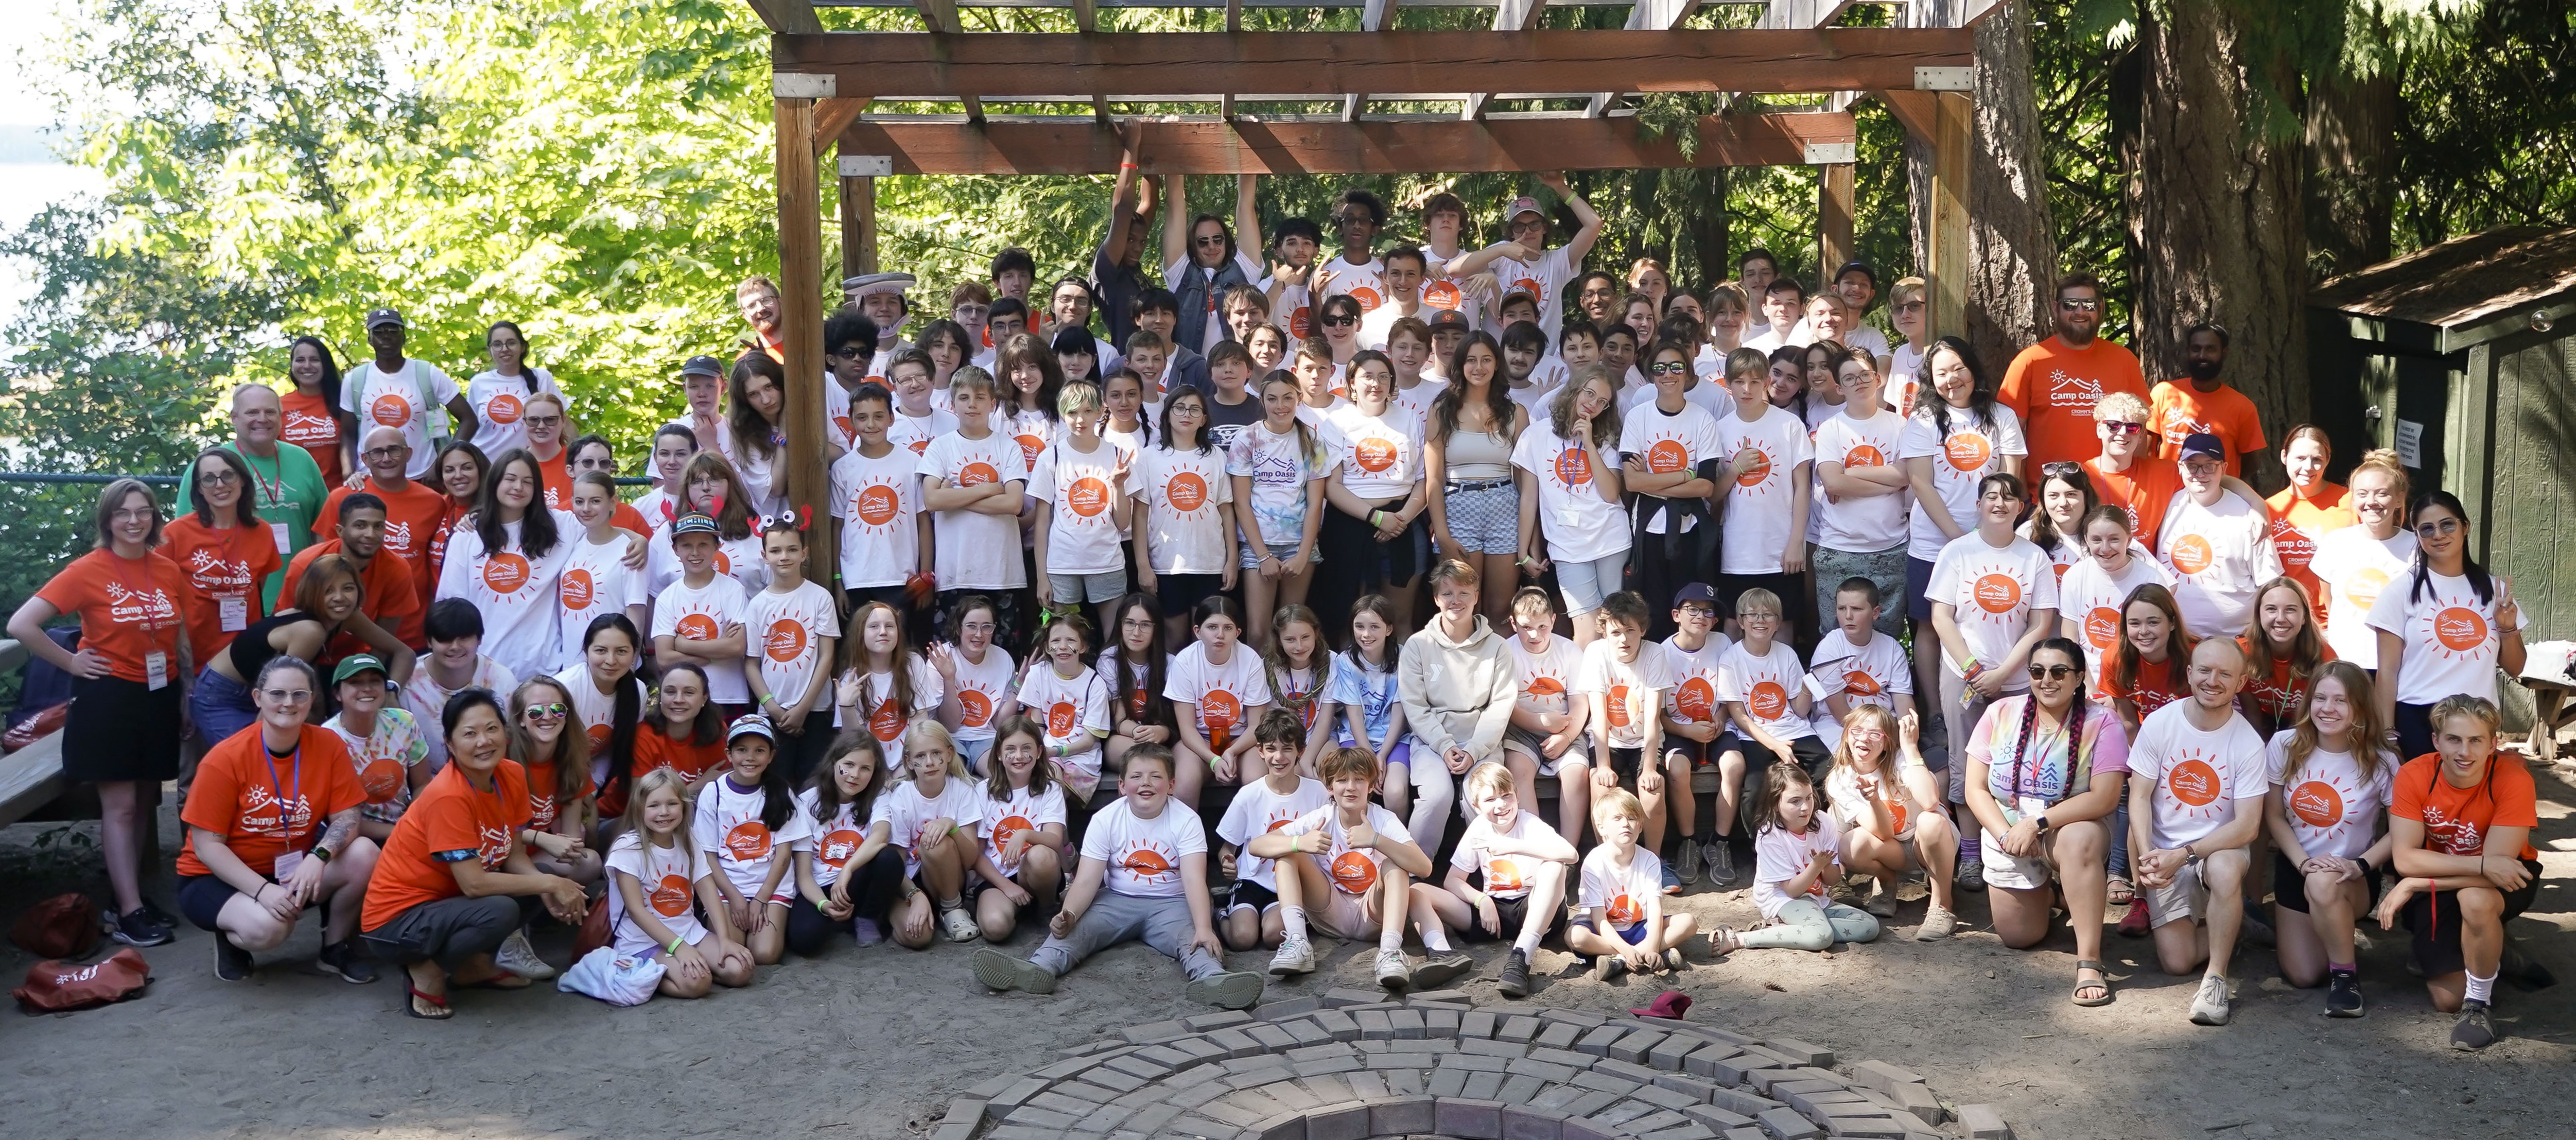 Camp Oasis group photo